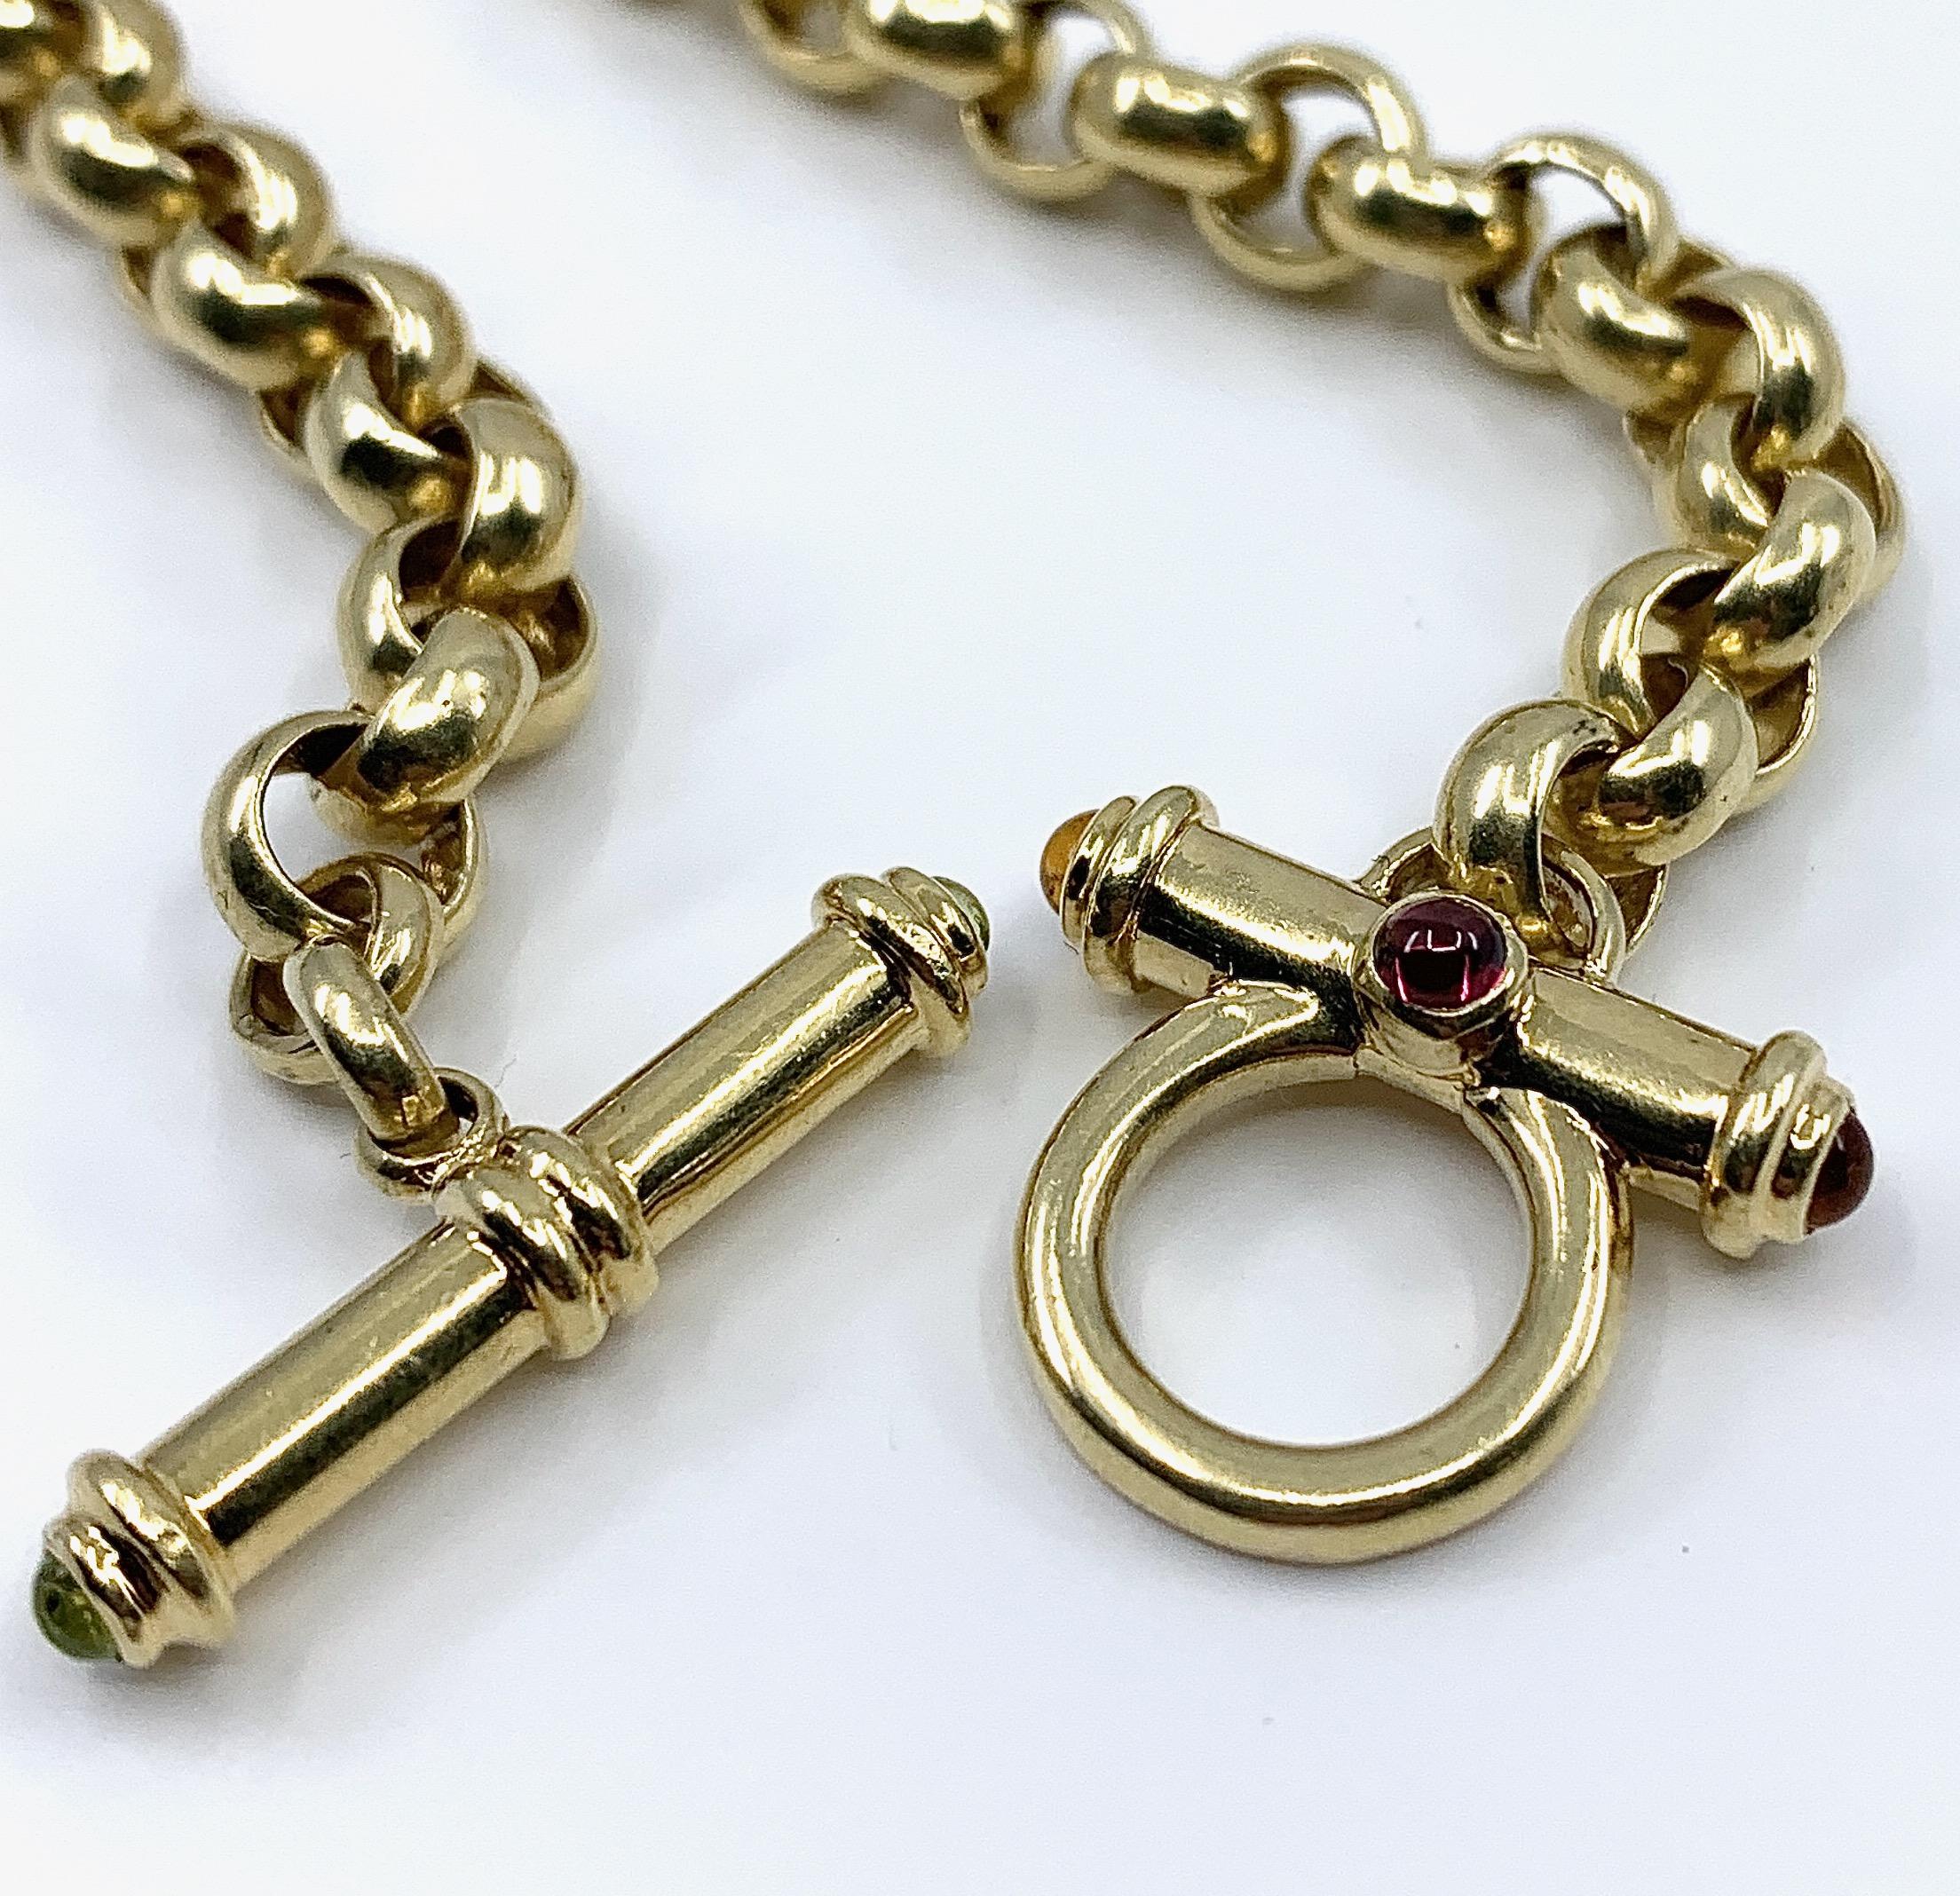 Round Cut Yellow Gold Chain Necklace with Gemstone-Tipped Toggle Clasp